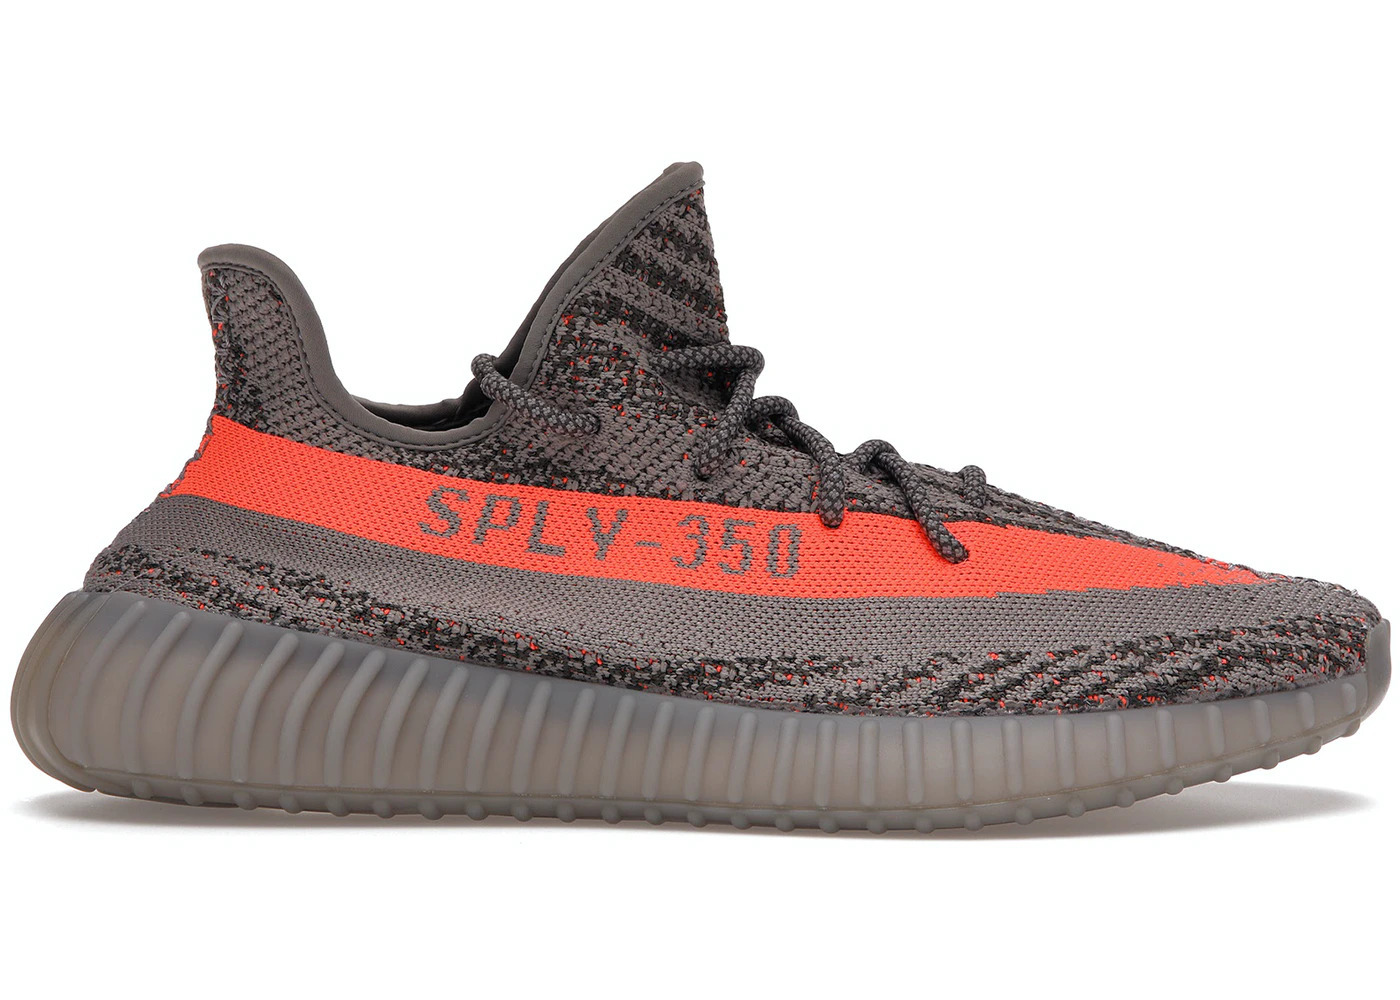 ADIDAS Yeezy Boost 350 V2 Beluga Reflective – The Hype Room Official Store